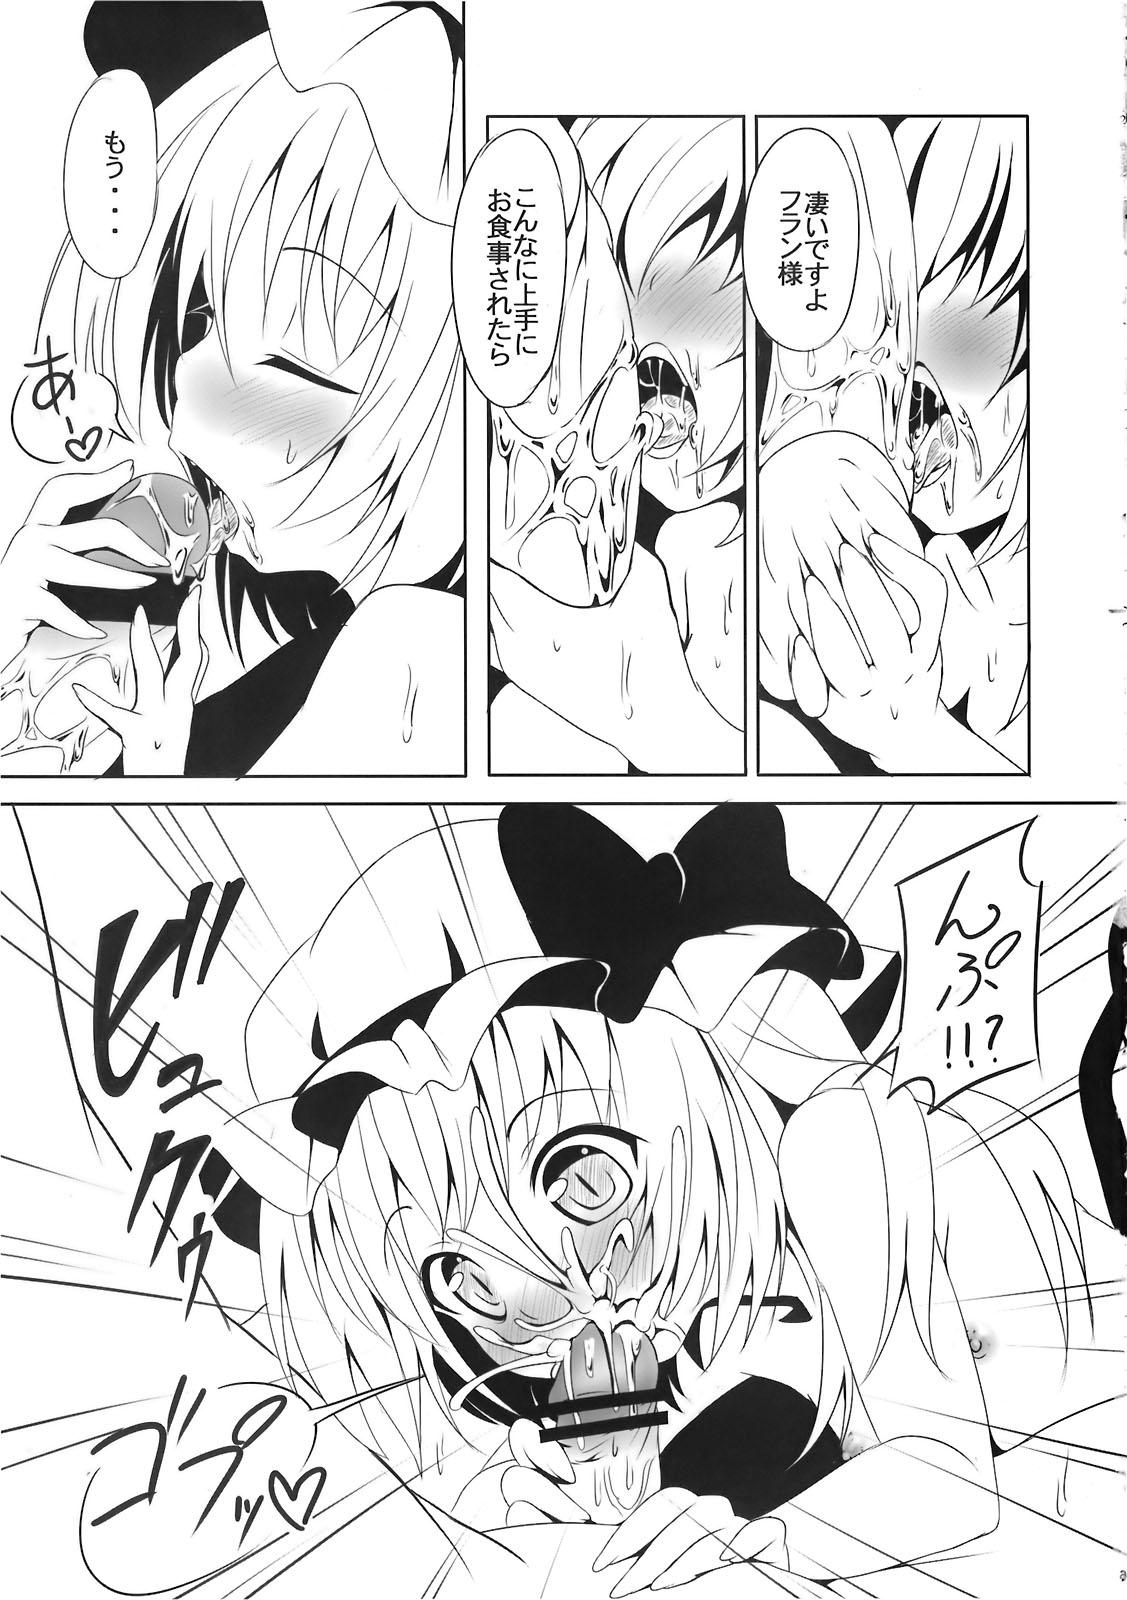 Cums franfran - Touhou project Hardsex - Page 7